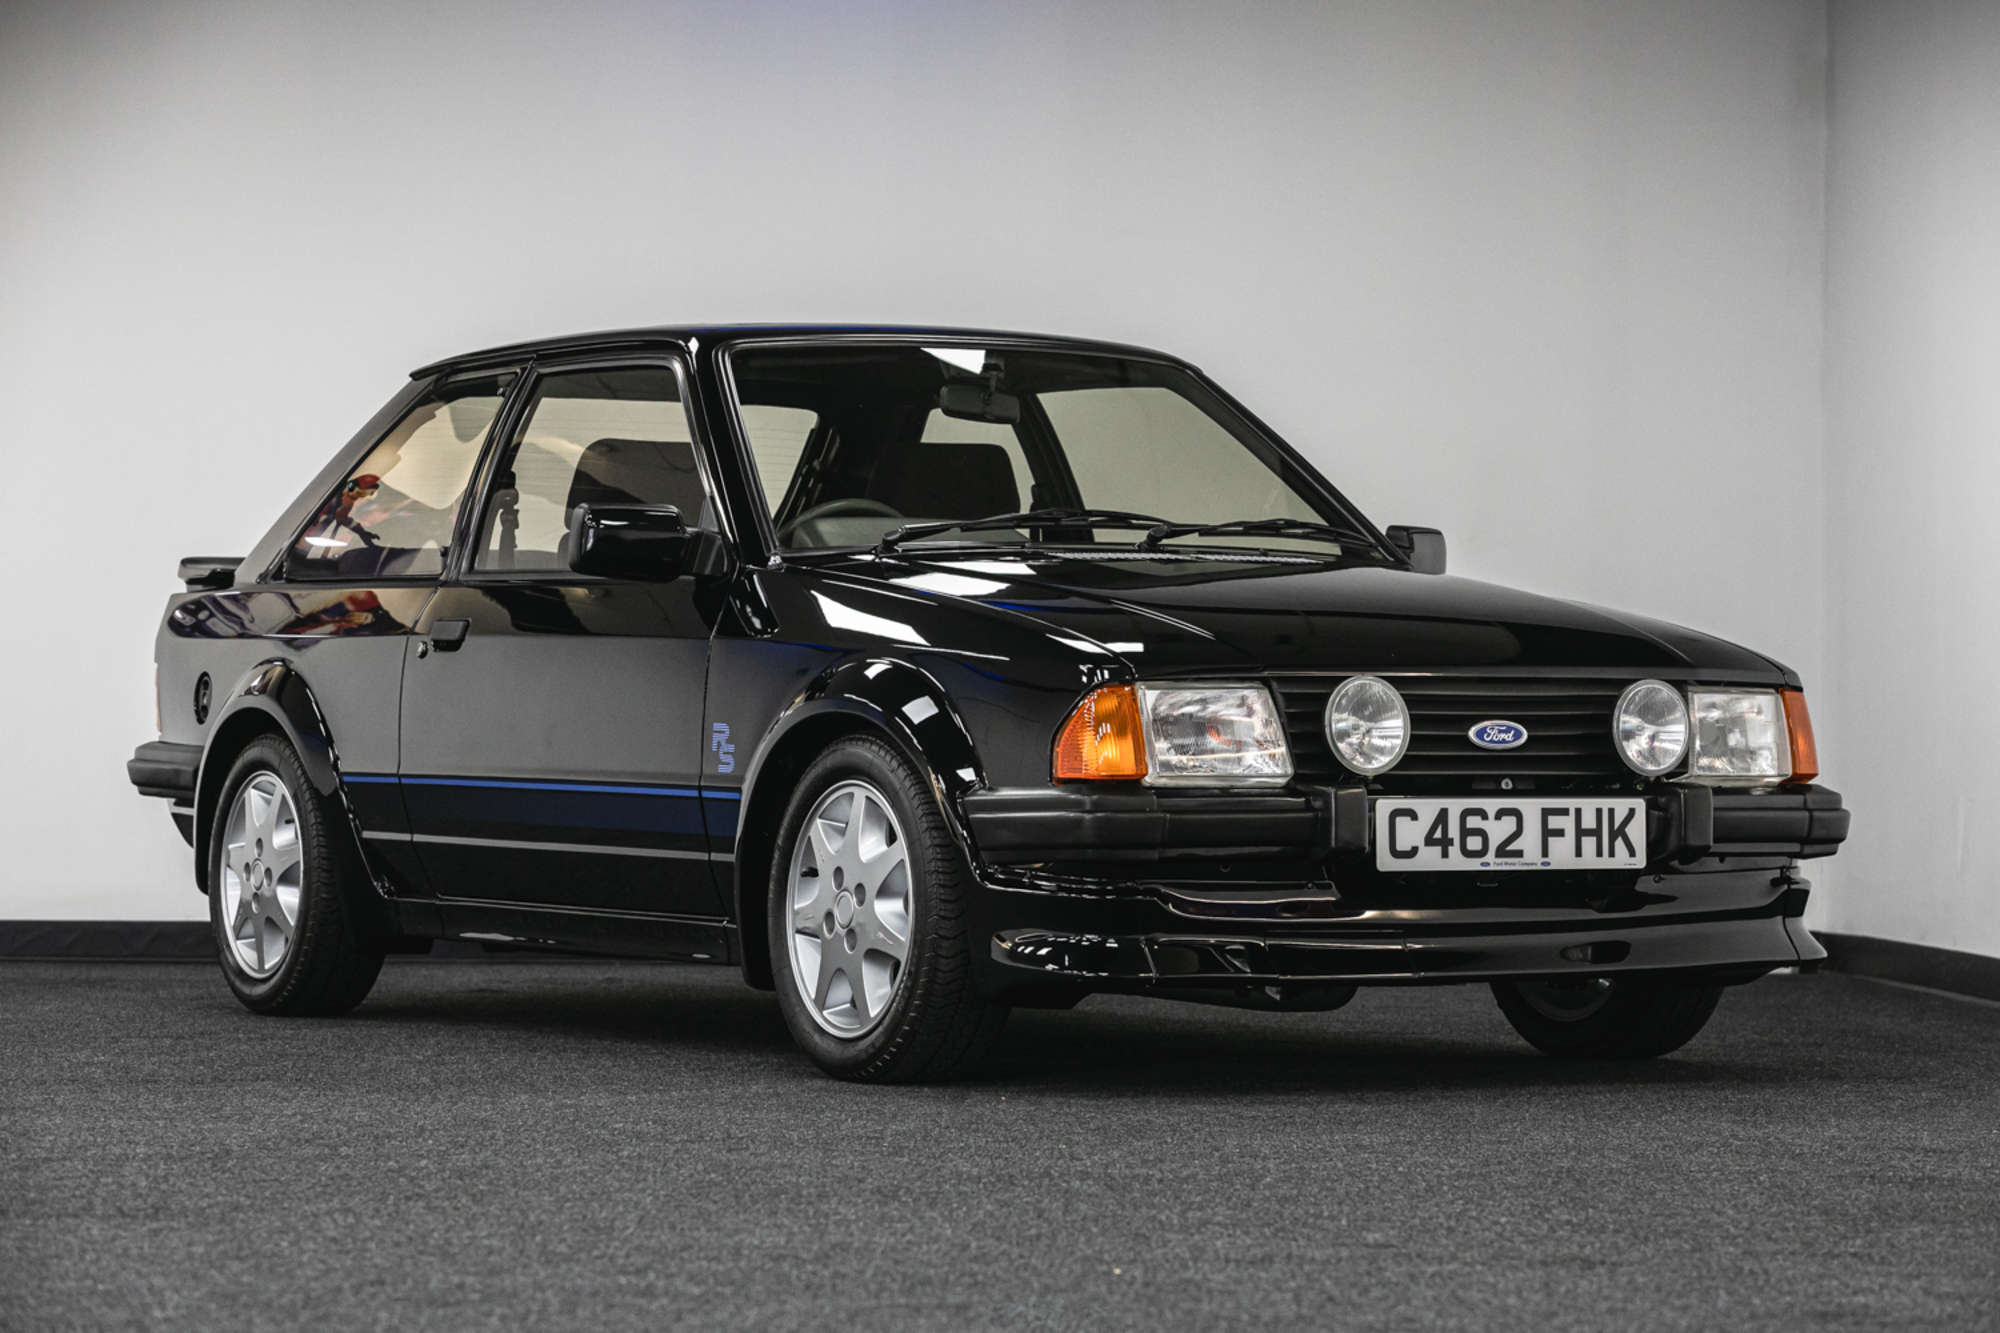 Princess Diana’s Ford Escort RS Turbo sells for £725,000